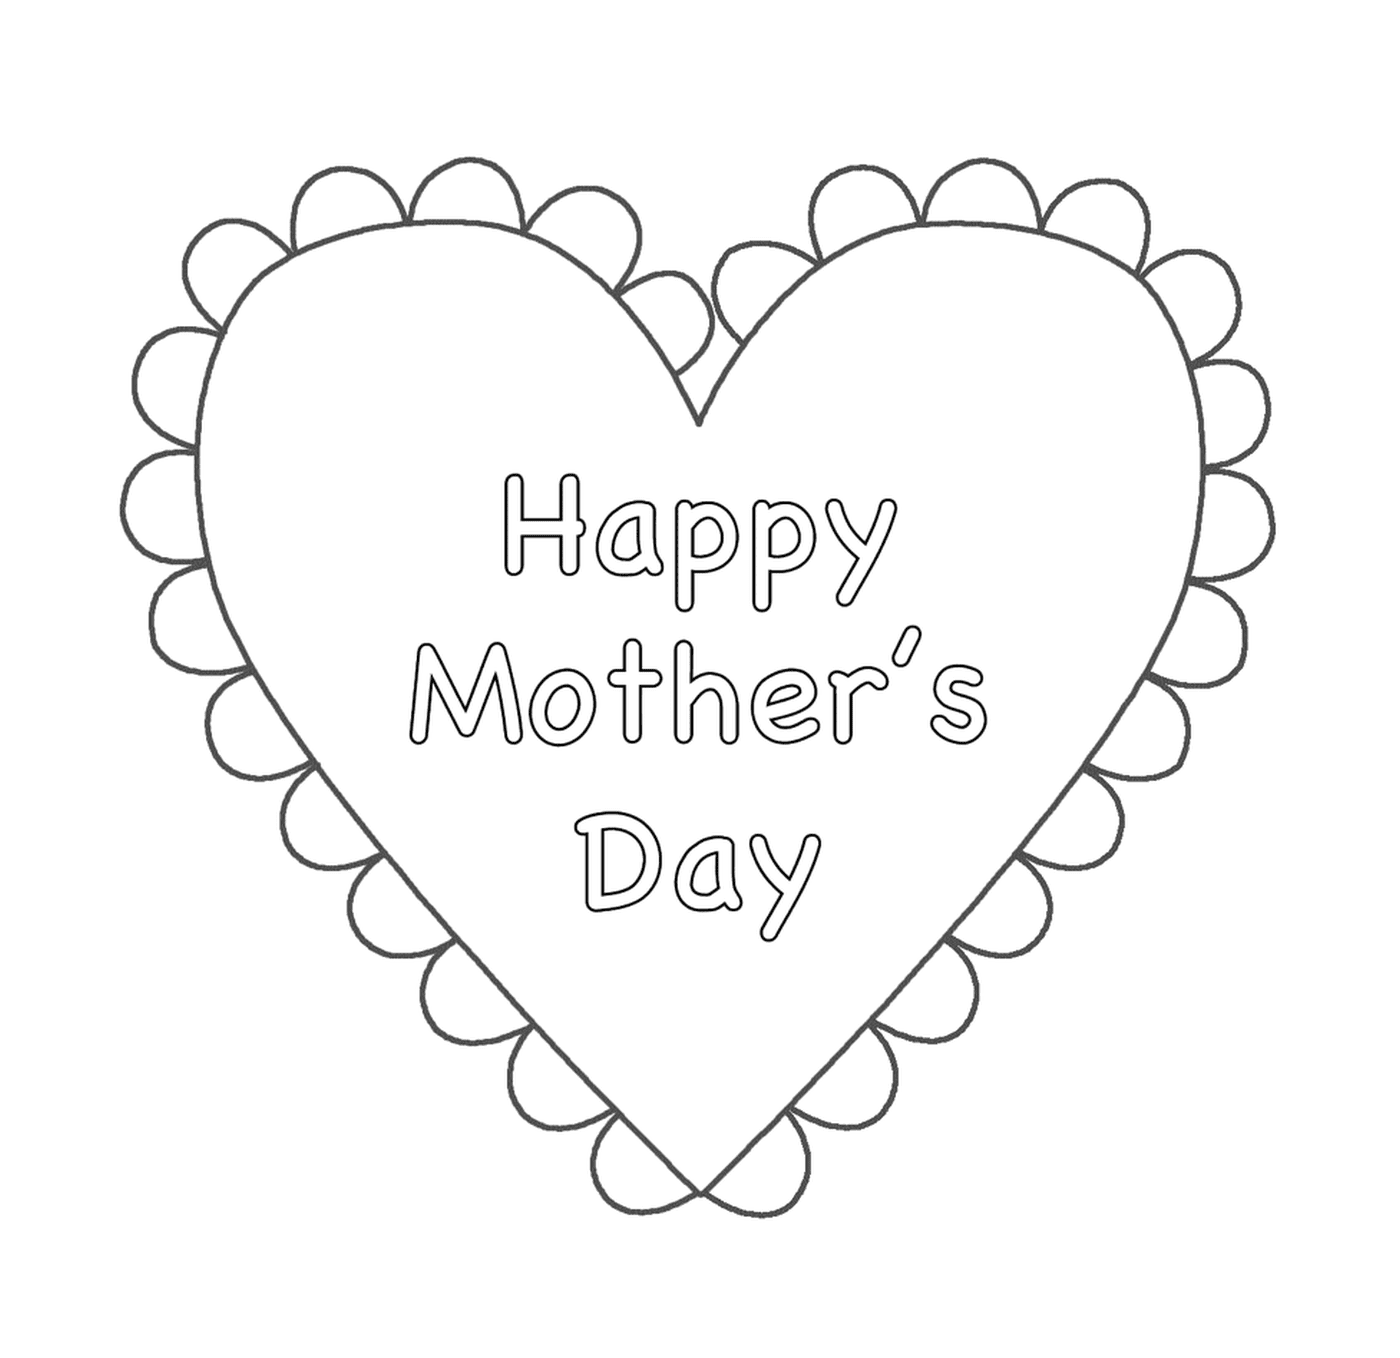  Happy Mother's Day with a happy heart 